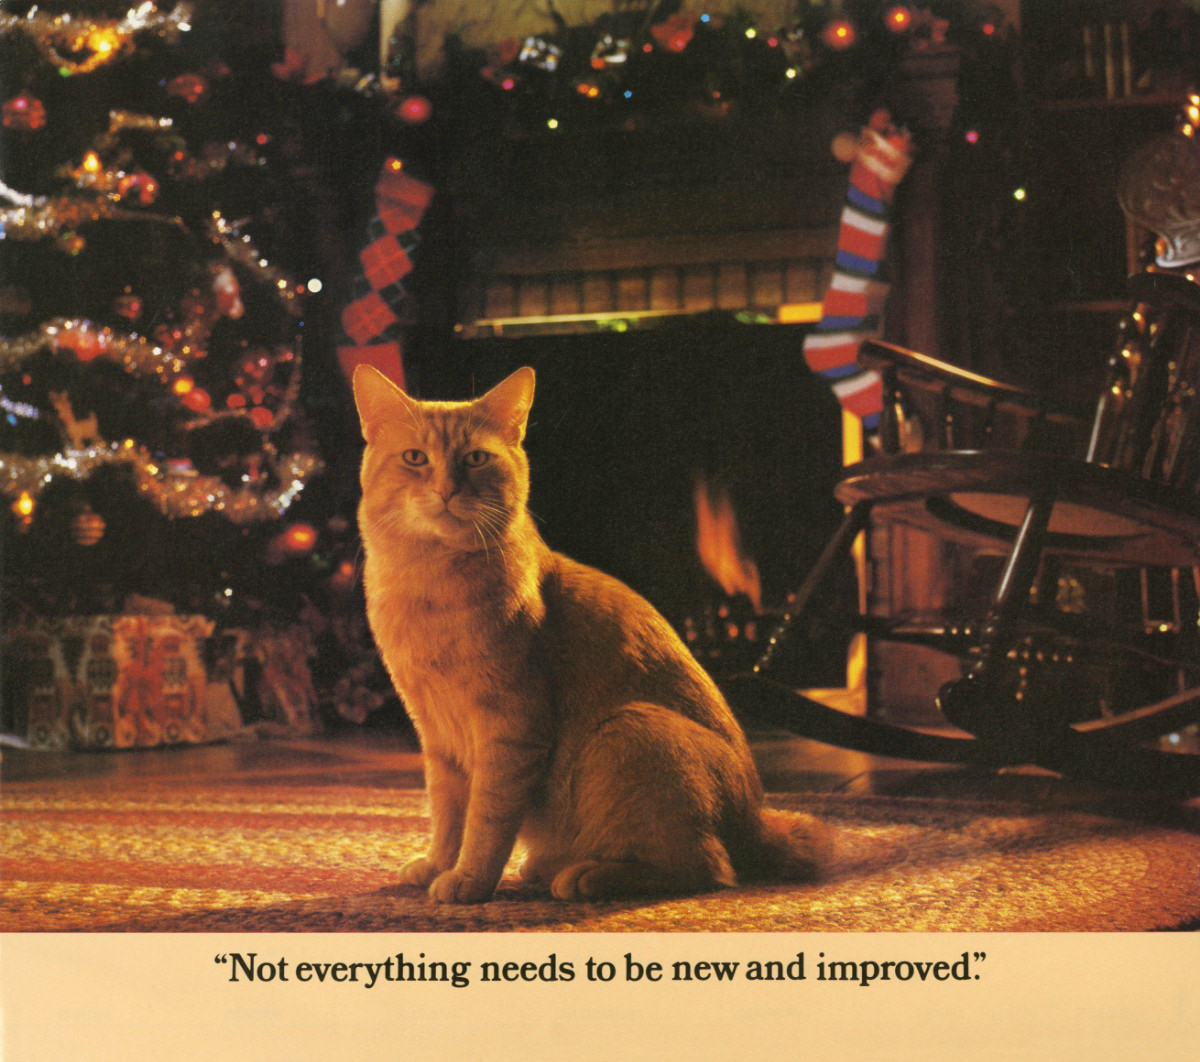 The 1986 Morris Calendar featuring the World's Most Finicky Cat